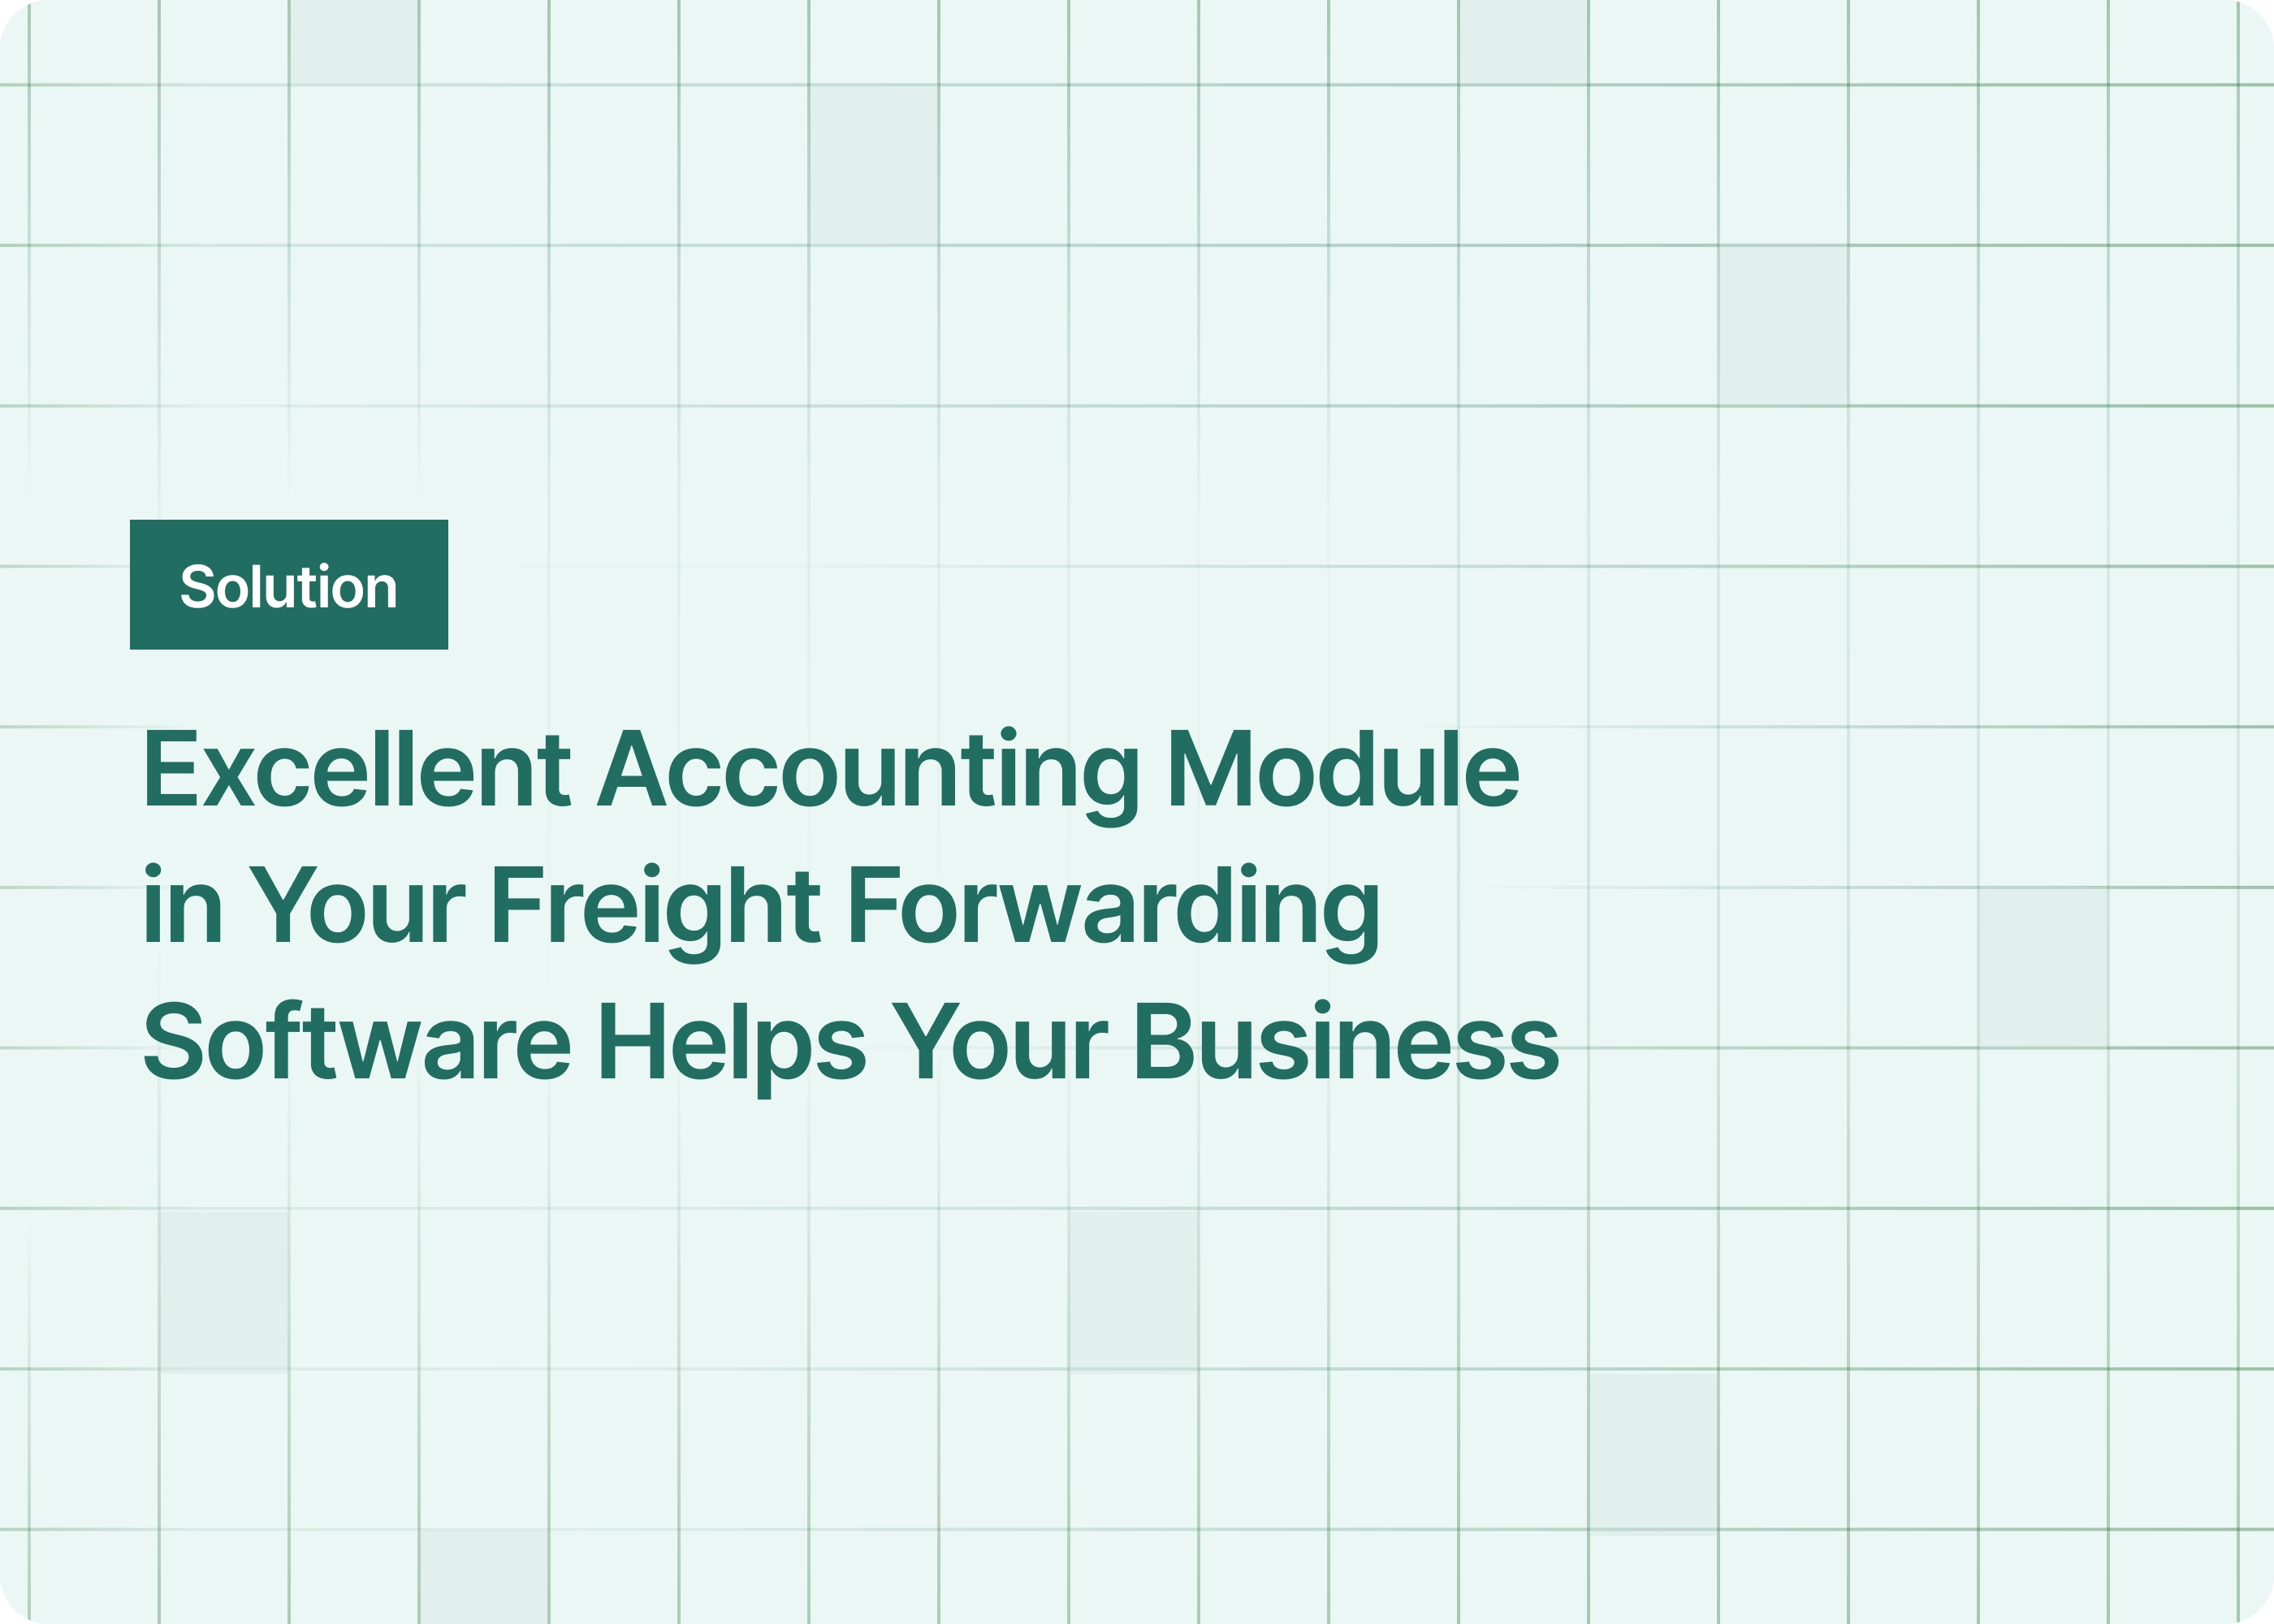 How Having an Excellent Accounting Module in Your Freight Forwarding Software Helps Your Business